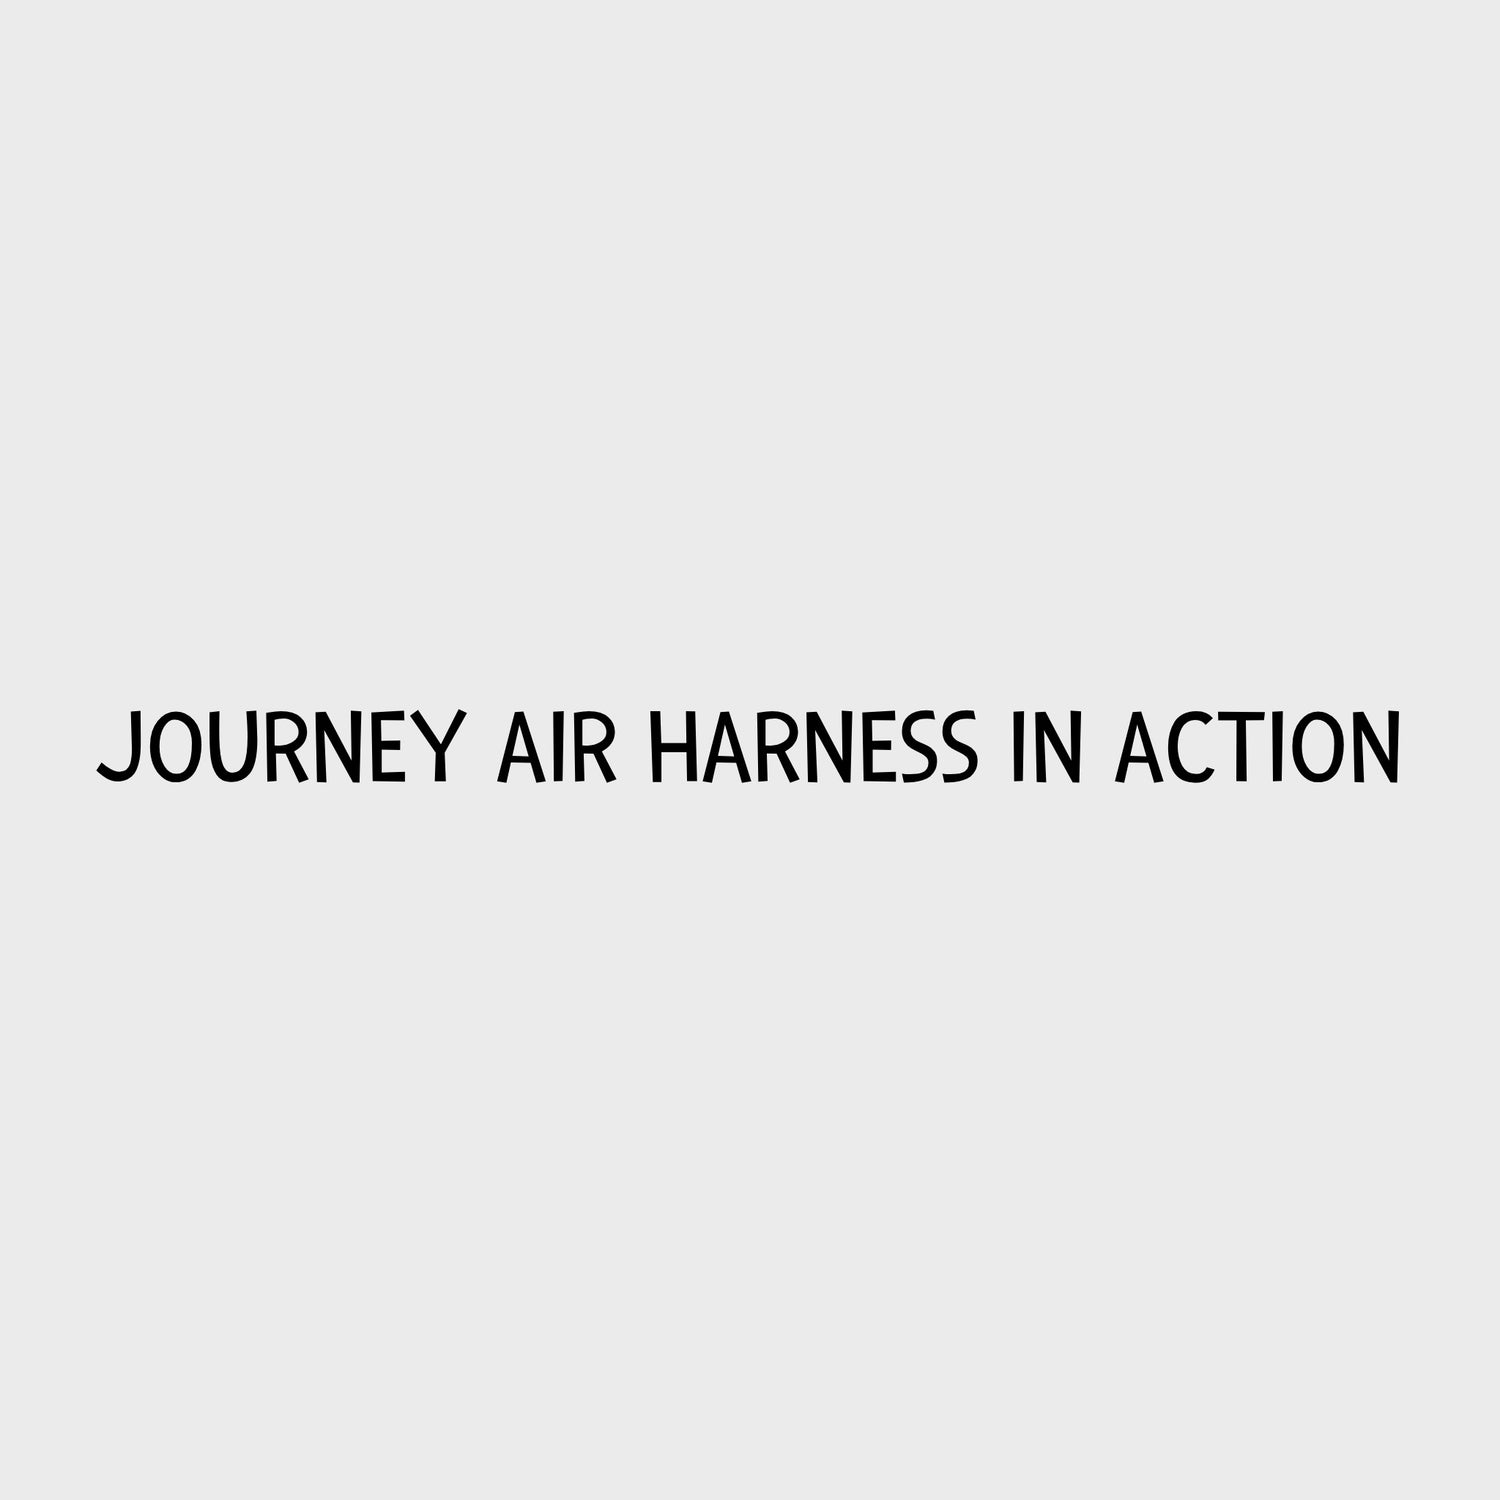 Video - Journey Air Harness in Action